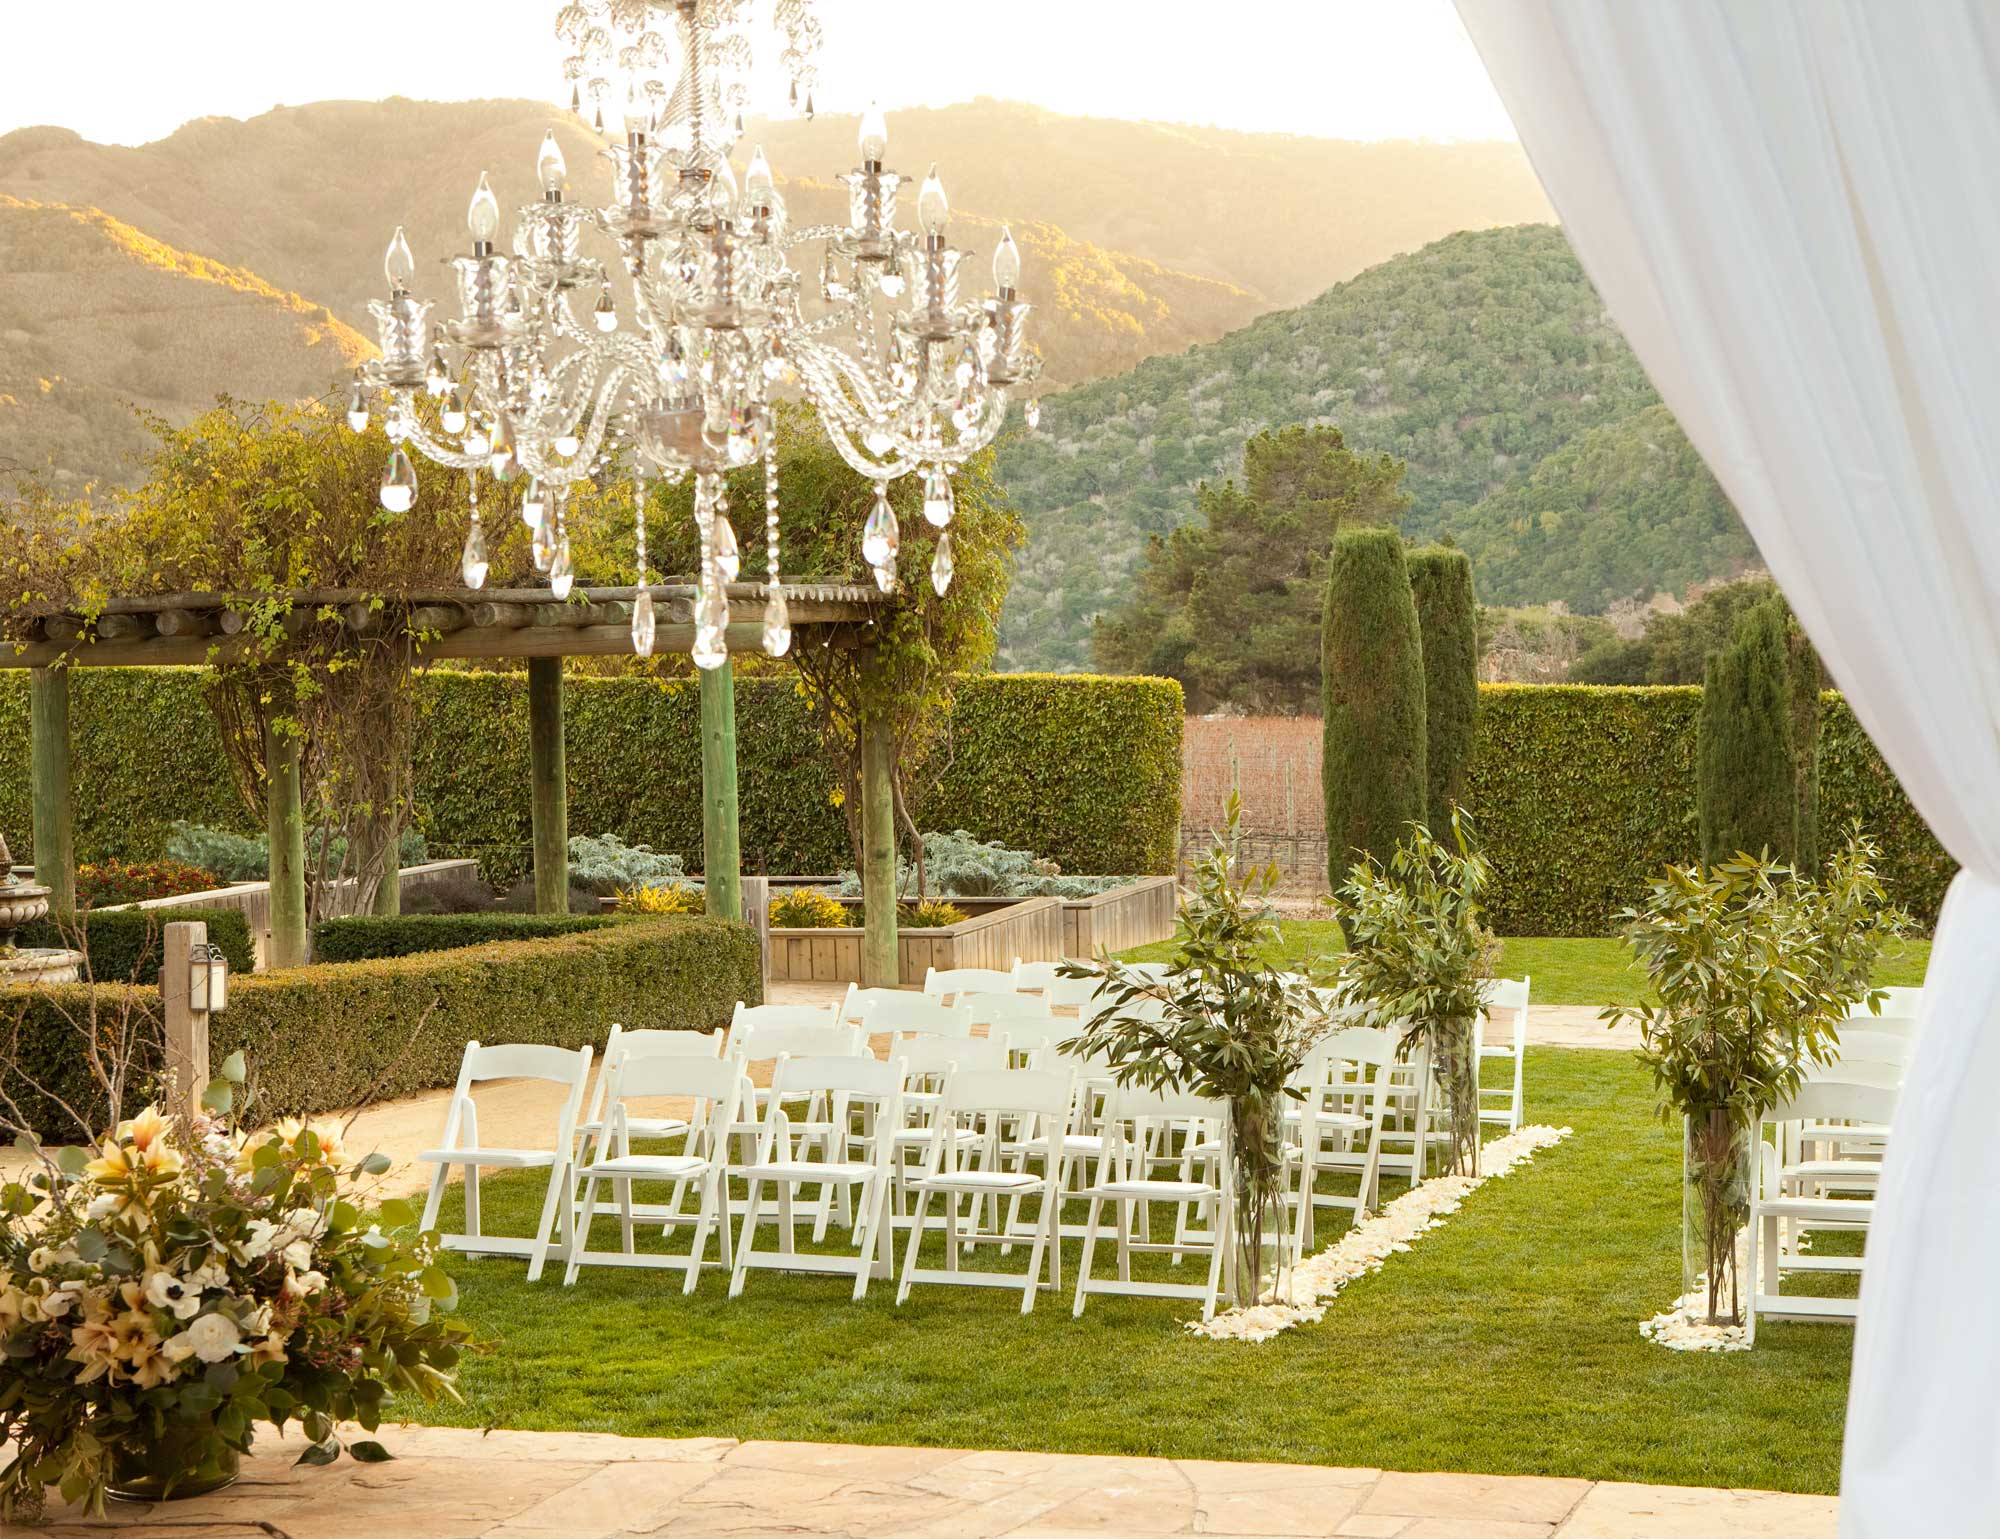 Destination Weddings Venues With Best Views | Unique Places to Get Married | Best Wedding Resorts | Barnardus Lodge and Spa Carmel California